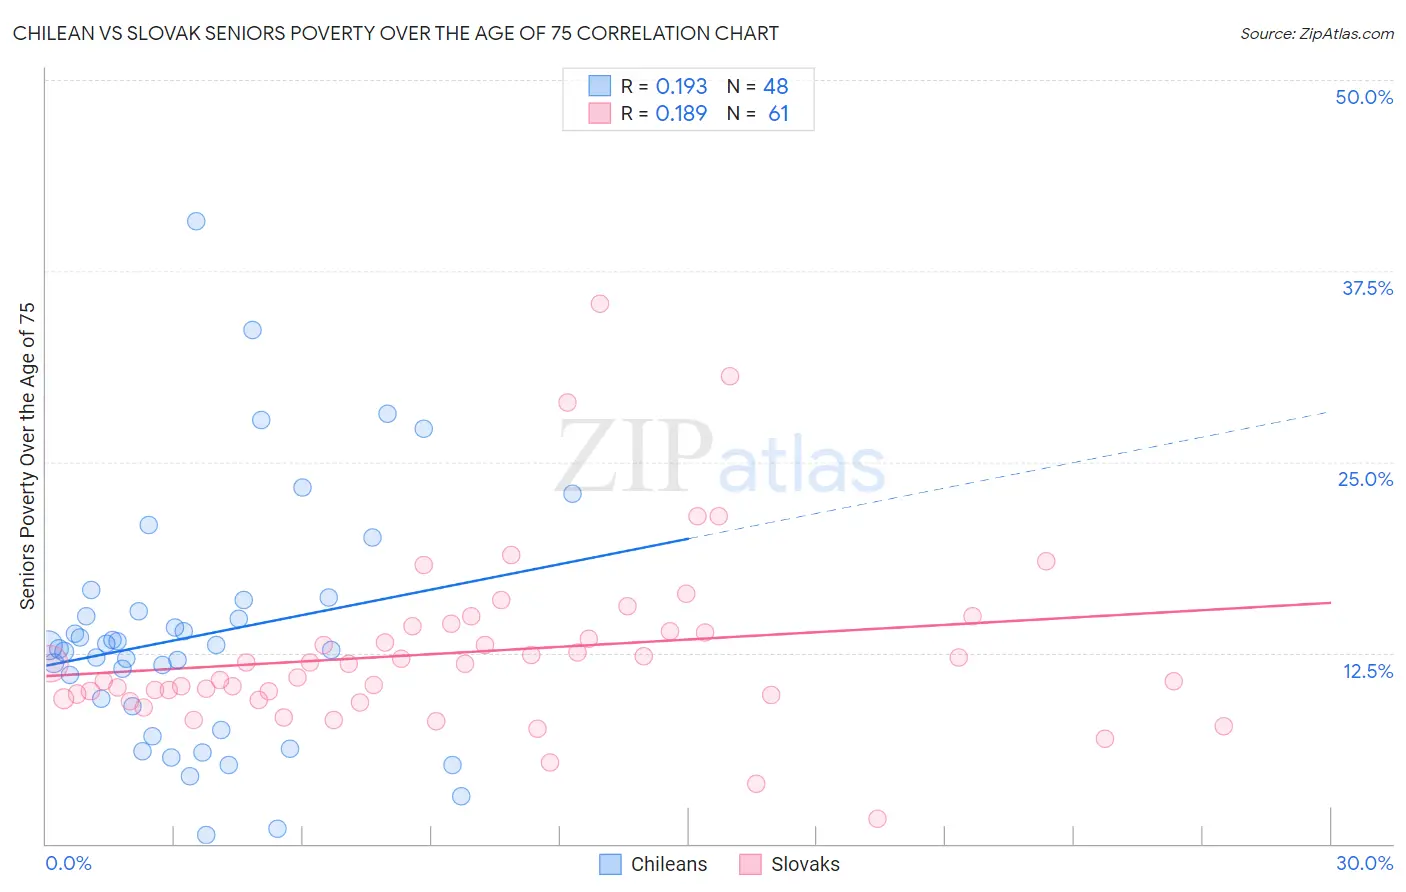 Chilean vs Slovak Seniors Poverty Over the Age of 75